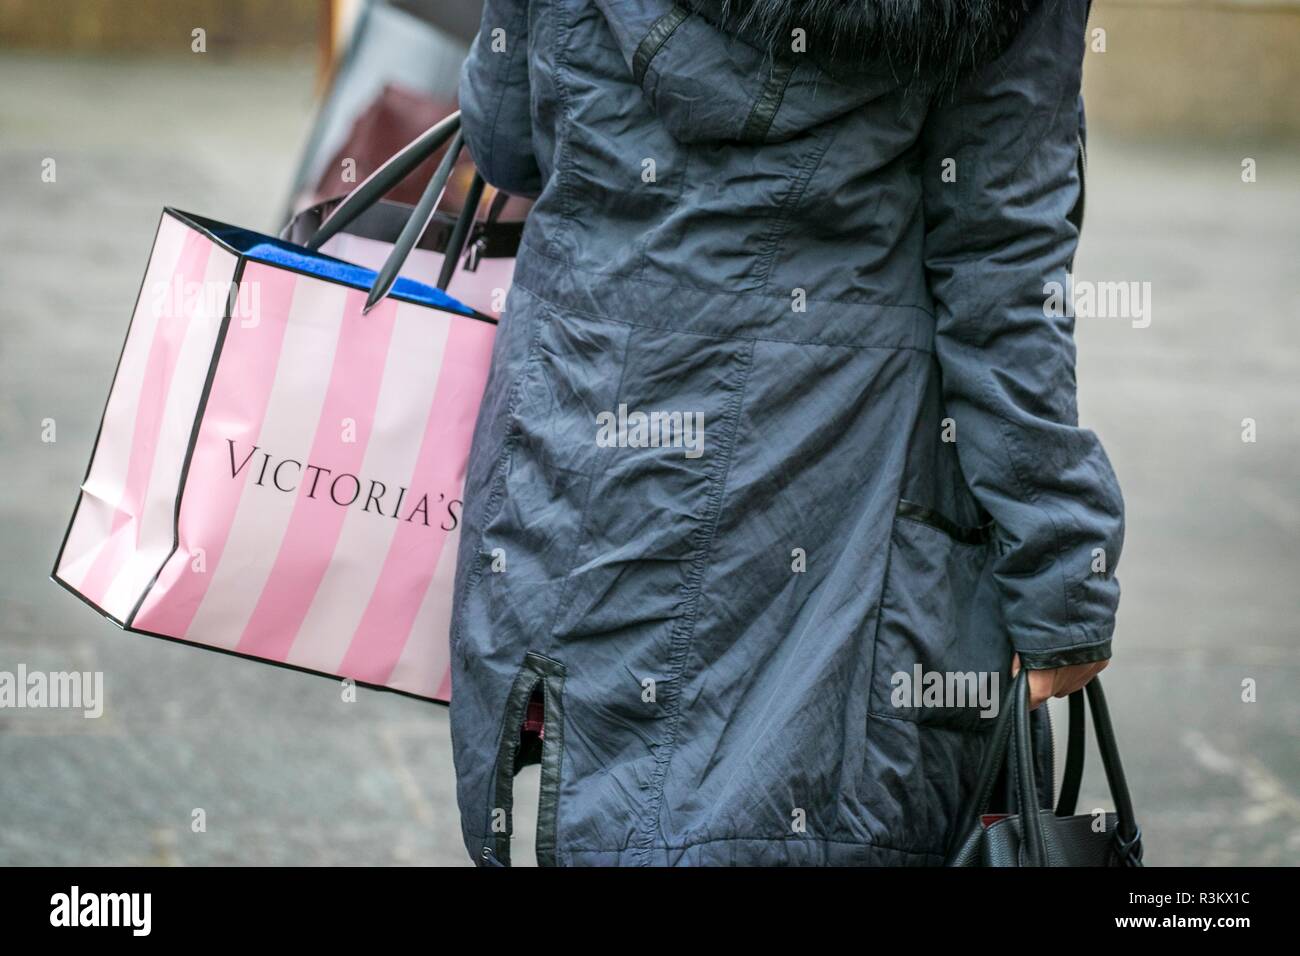 Victorias secret logo hi-res stock photography and images - Alamy